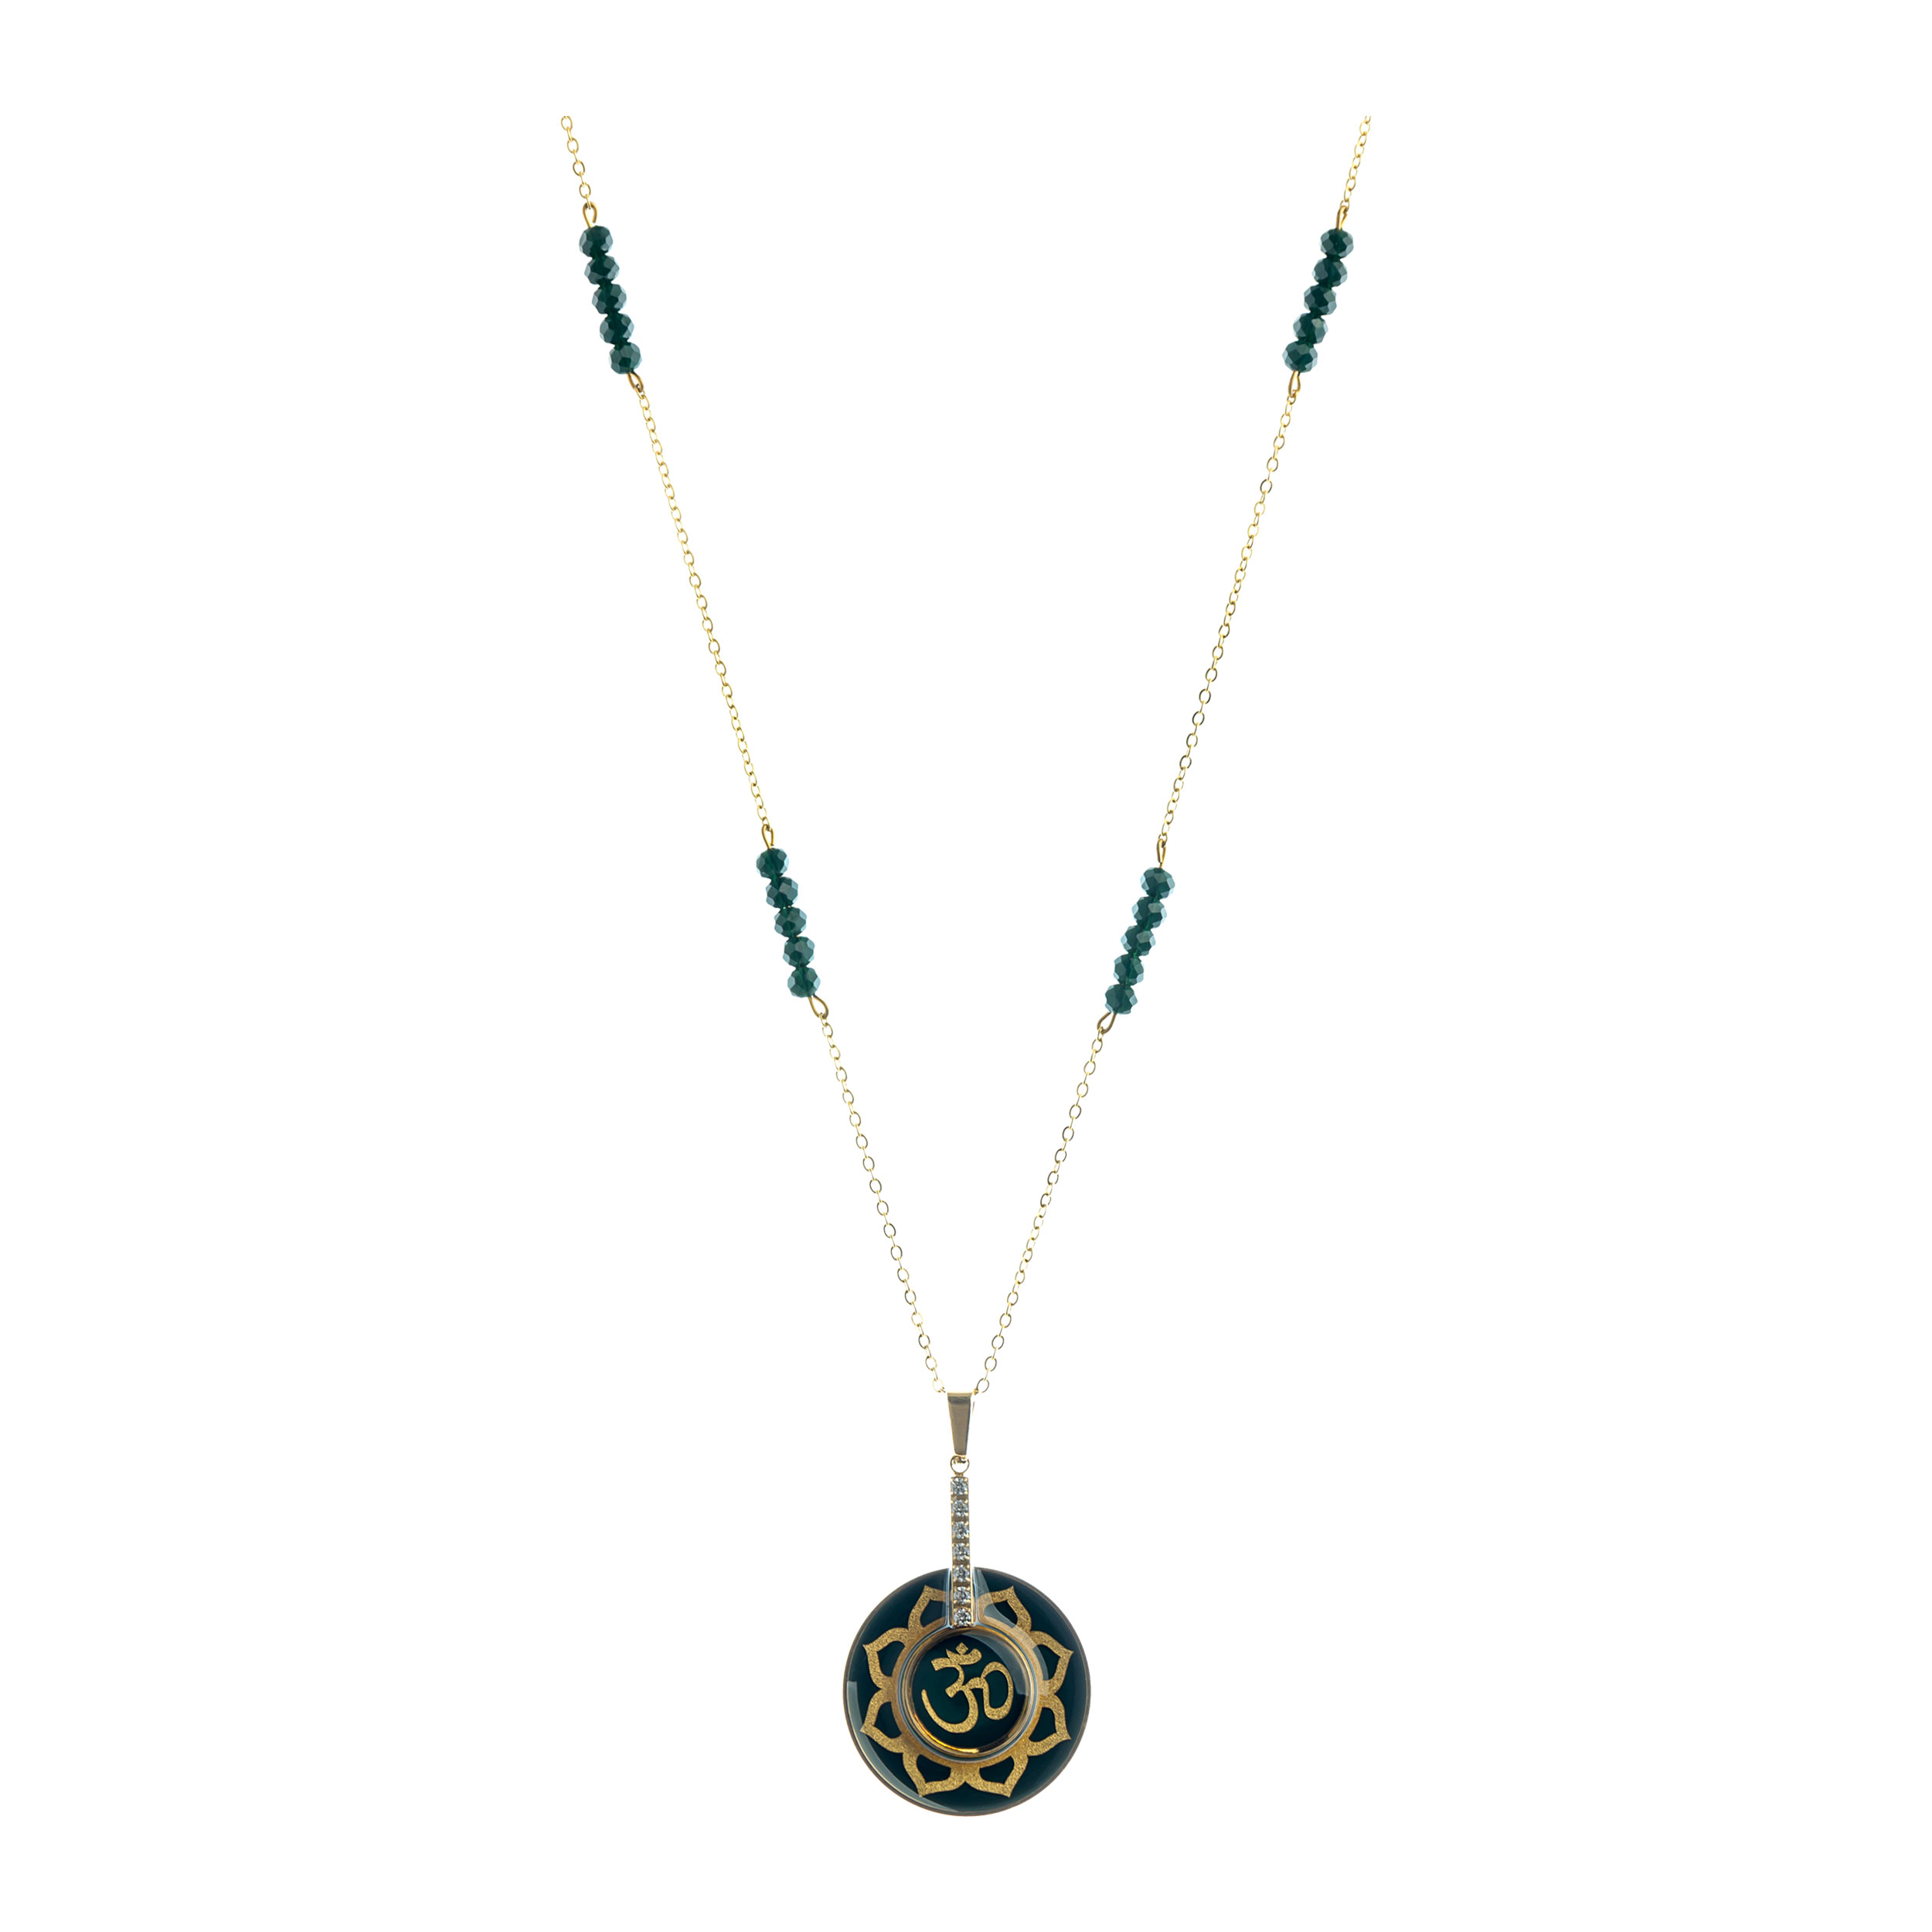 AUM green agate necklace and 24 carat gold leaf necklace